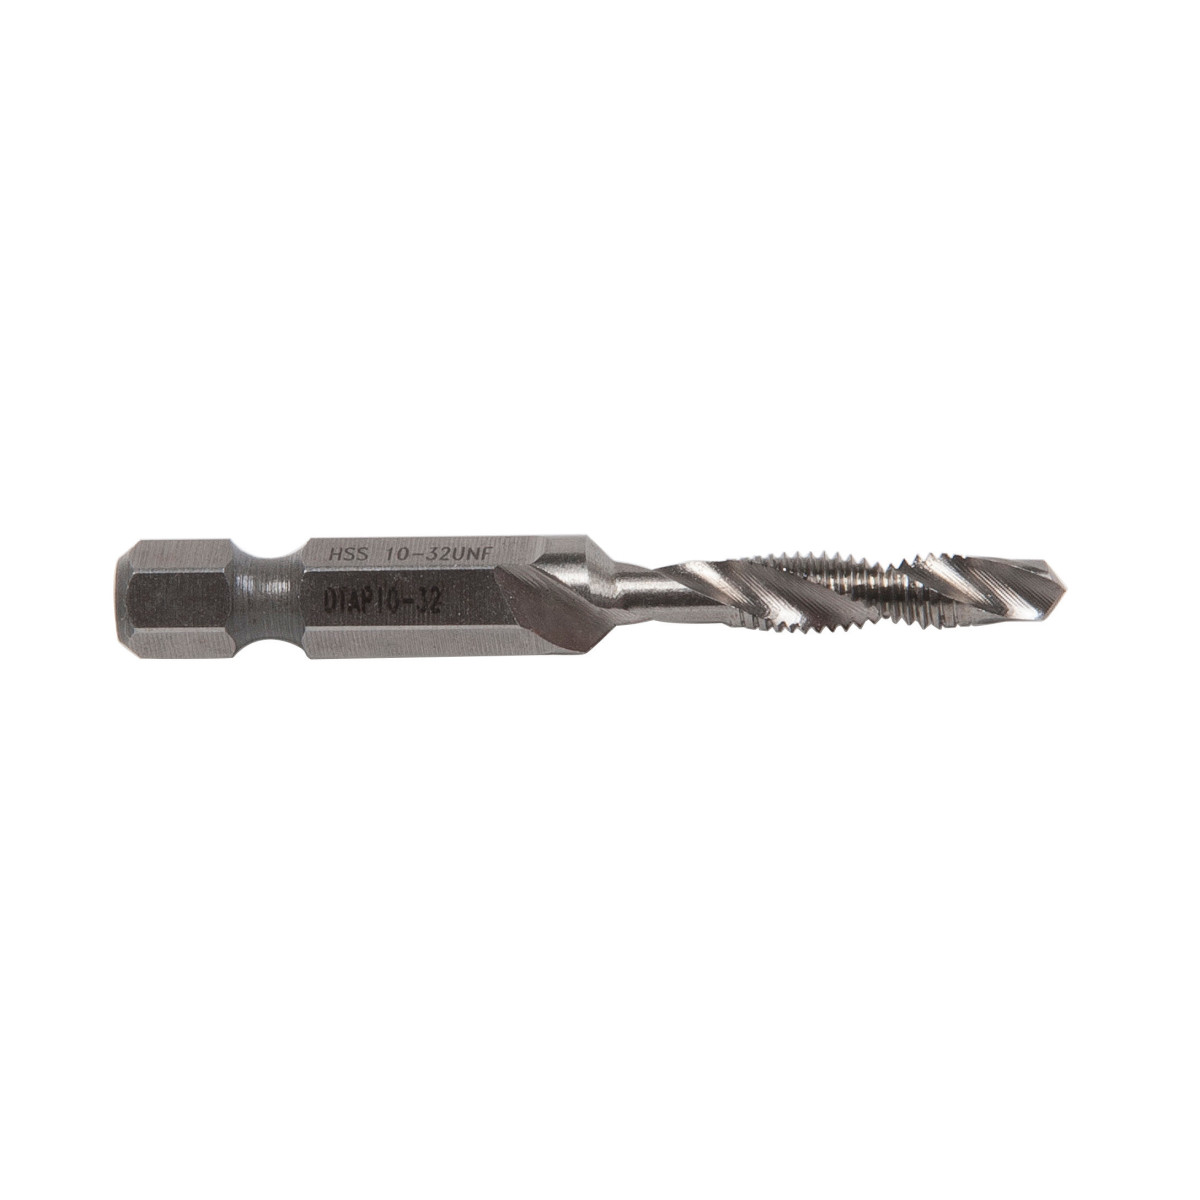 Combination Drill/Tap Bits.  10-32NF.  Complete hole drilling, tapping and deburring/countersinking in one operation with power drill saves labor and time.  Back tapered beyond tap to prevent thread damage from over-drilling.  Deburr/countersink also provided on bit beyond back taper.  Made from hardened high-speed steel vs. carbon steel for longer life.  High quality hex shank to ensure strong connection to drill chuck.  Designed to tap up to 10-gauge metal.  Quick change adaptor included in both metric and standard kits.